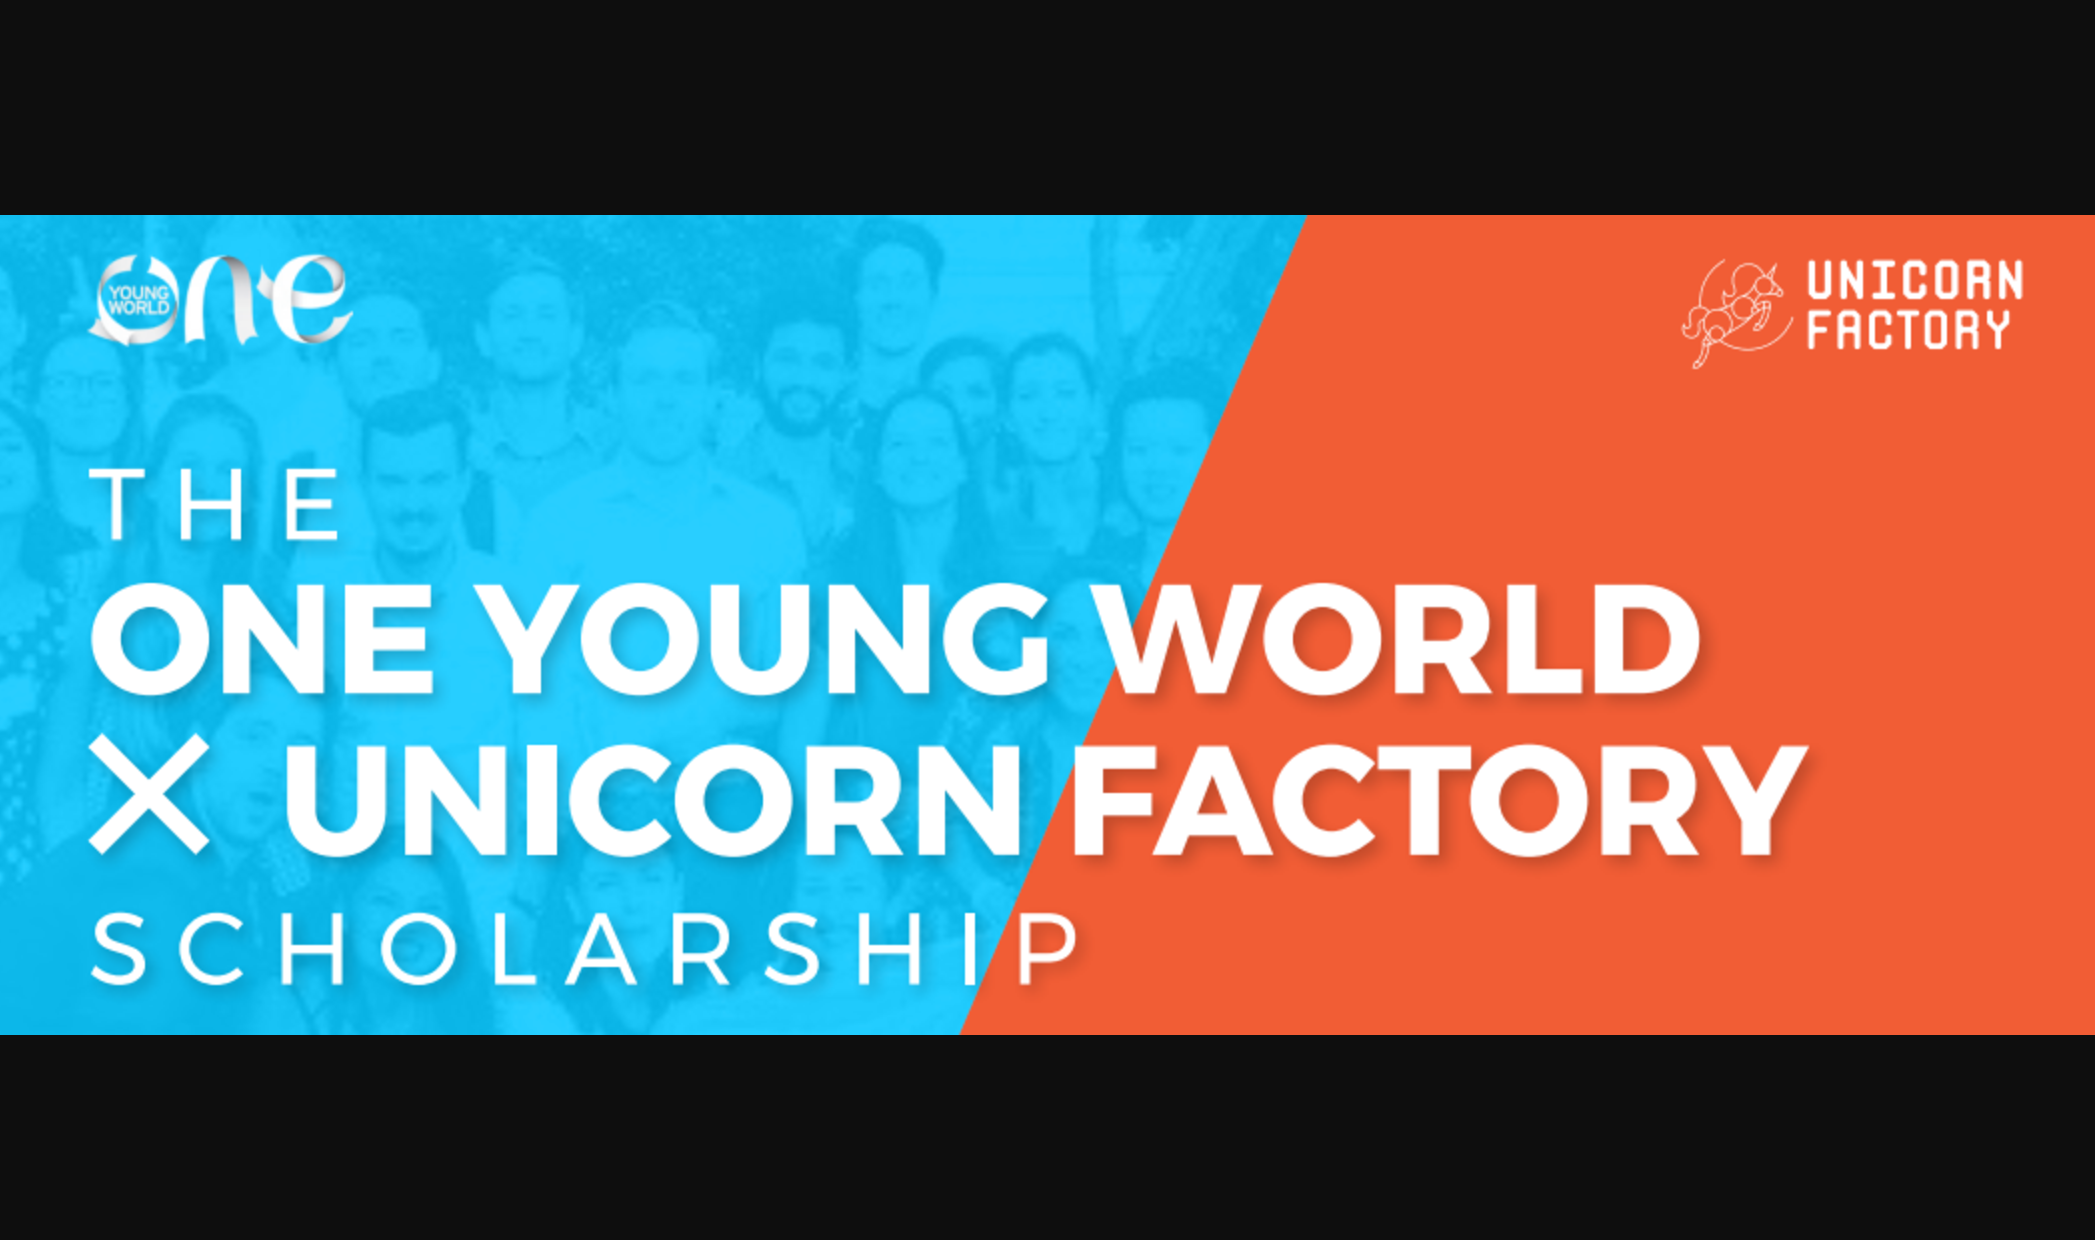 Unicorn Factory Scholarship to attend One Young World 2017 in Bogotá, Colombia